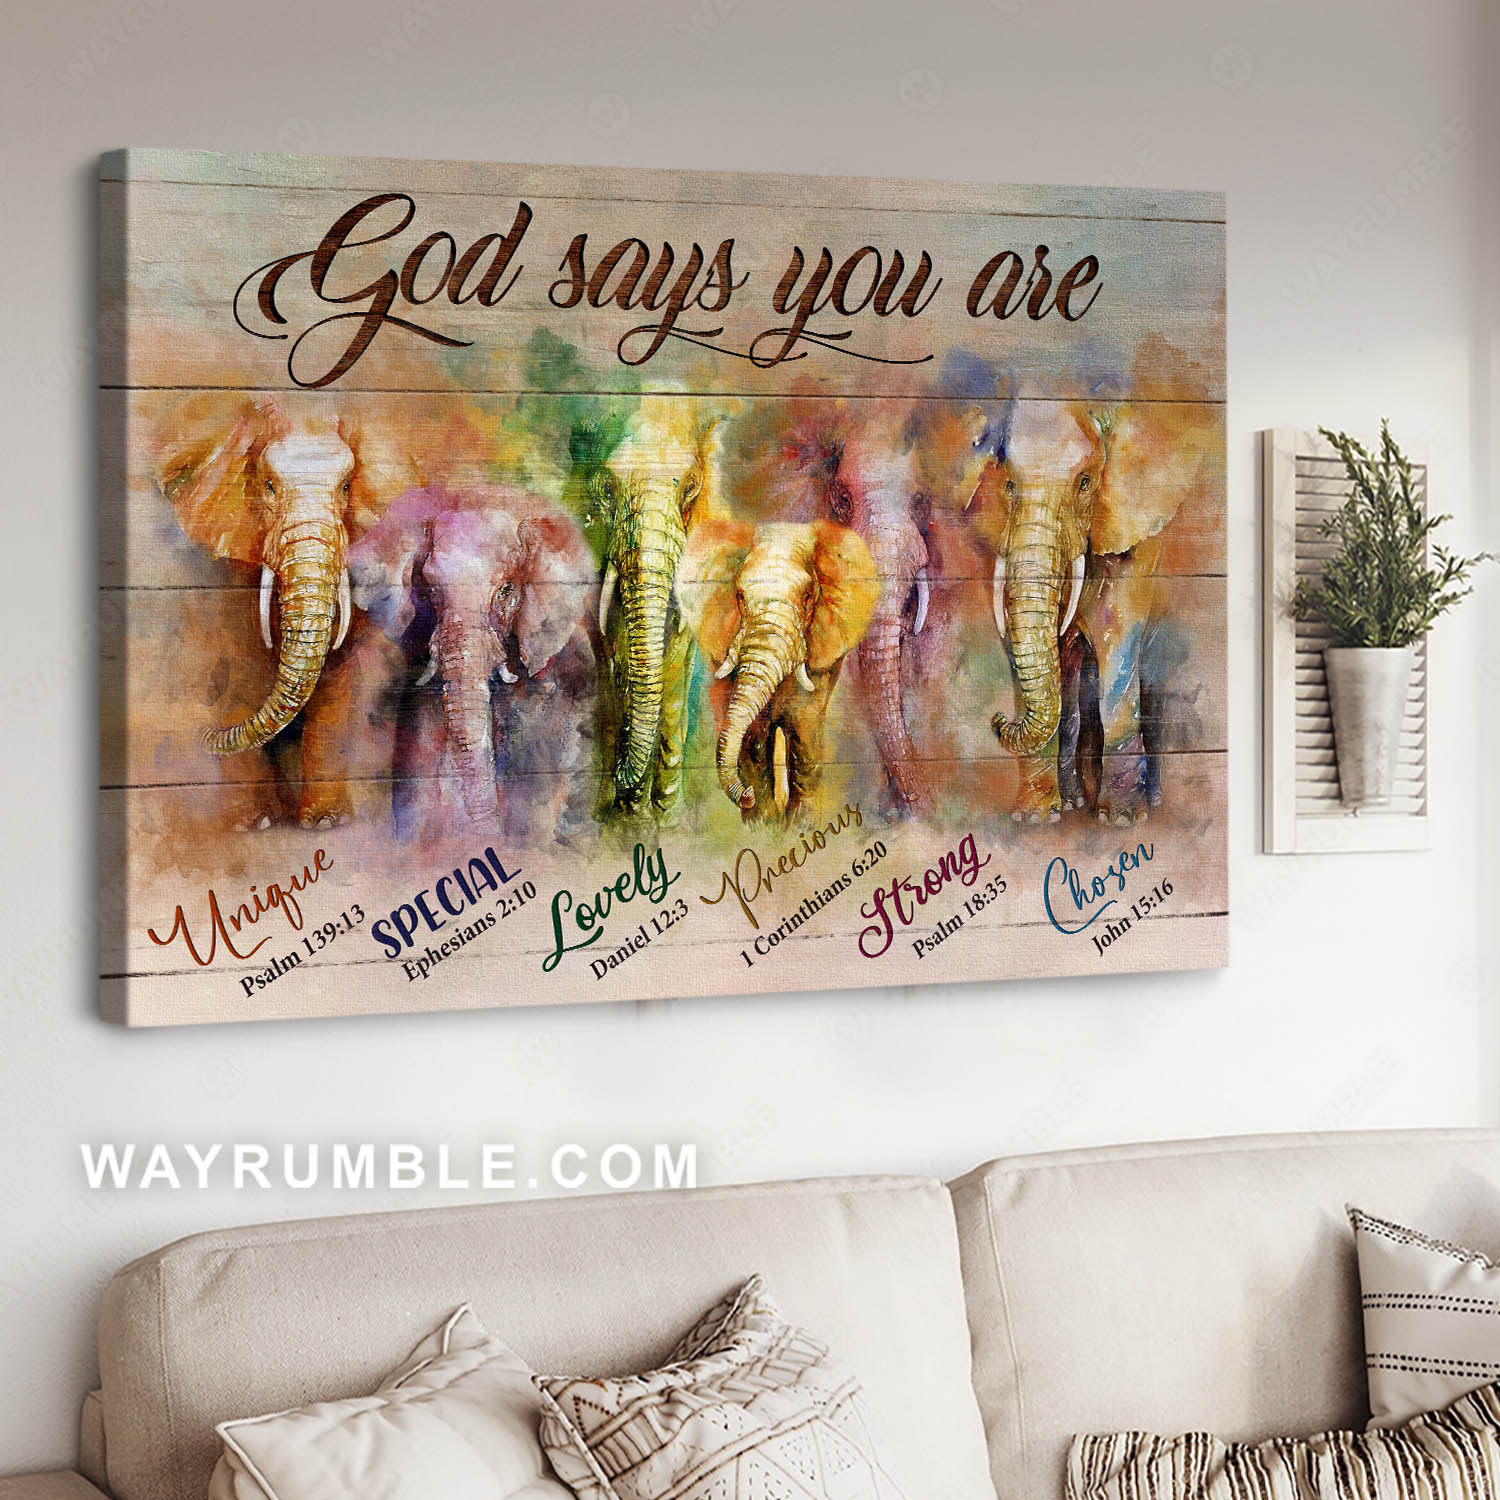 Elephant painting, Watercolor elephant, Wild animal, Bible verse, God says you are - Jesus Landscape Canvas Prints, Home Decor Wall Art